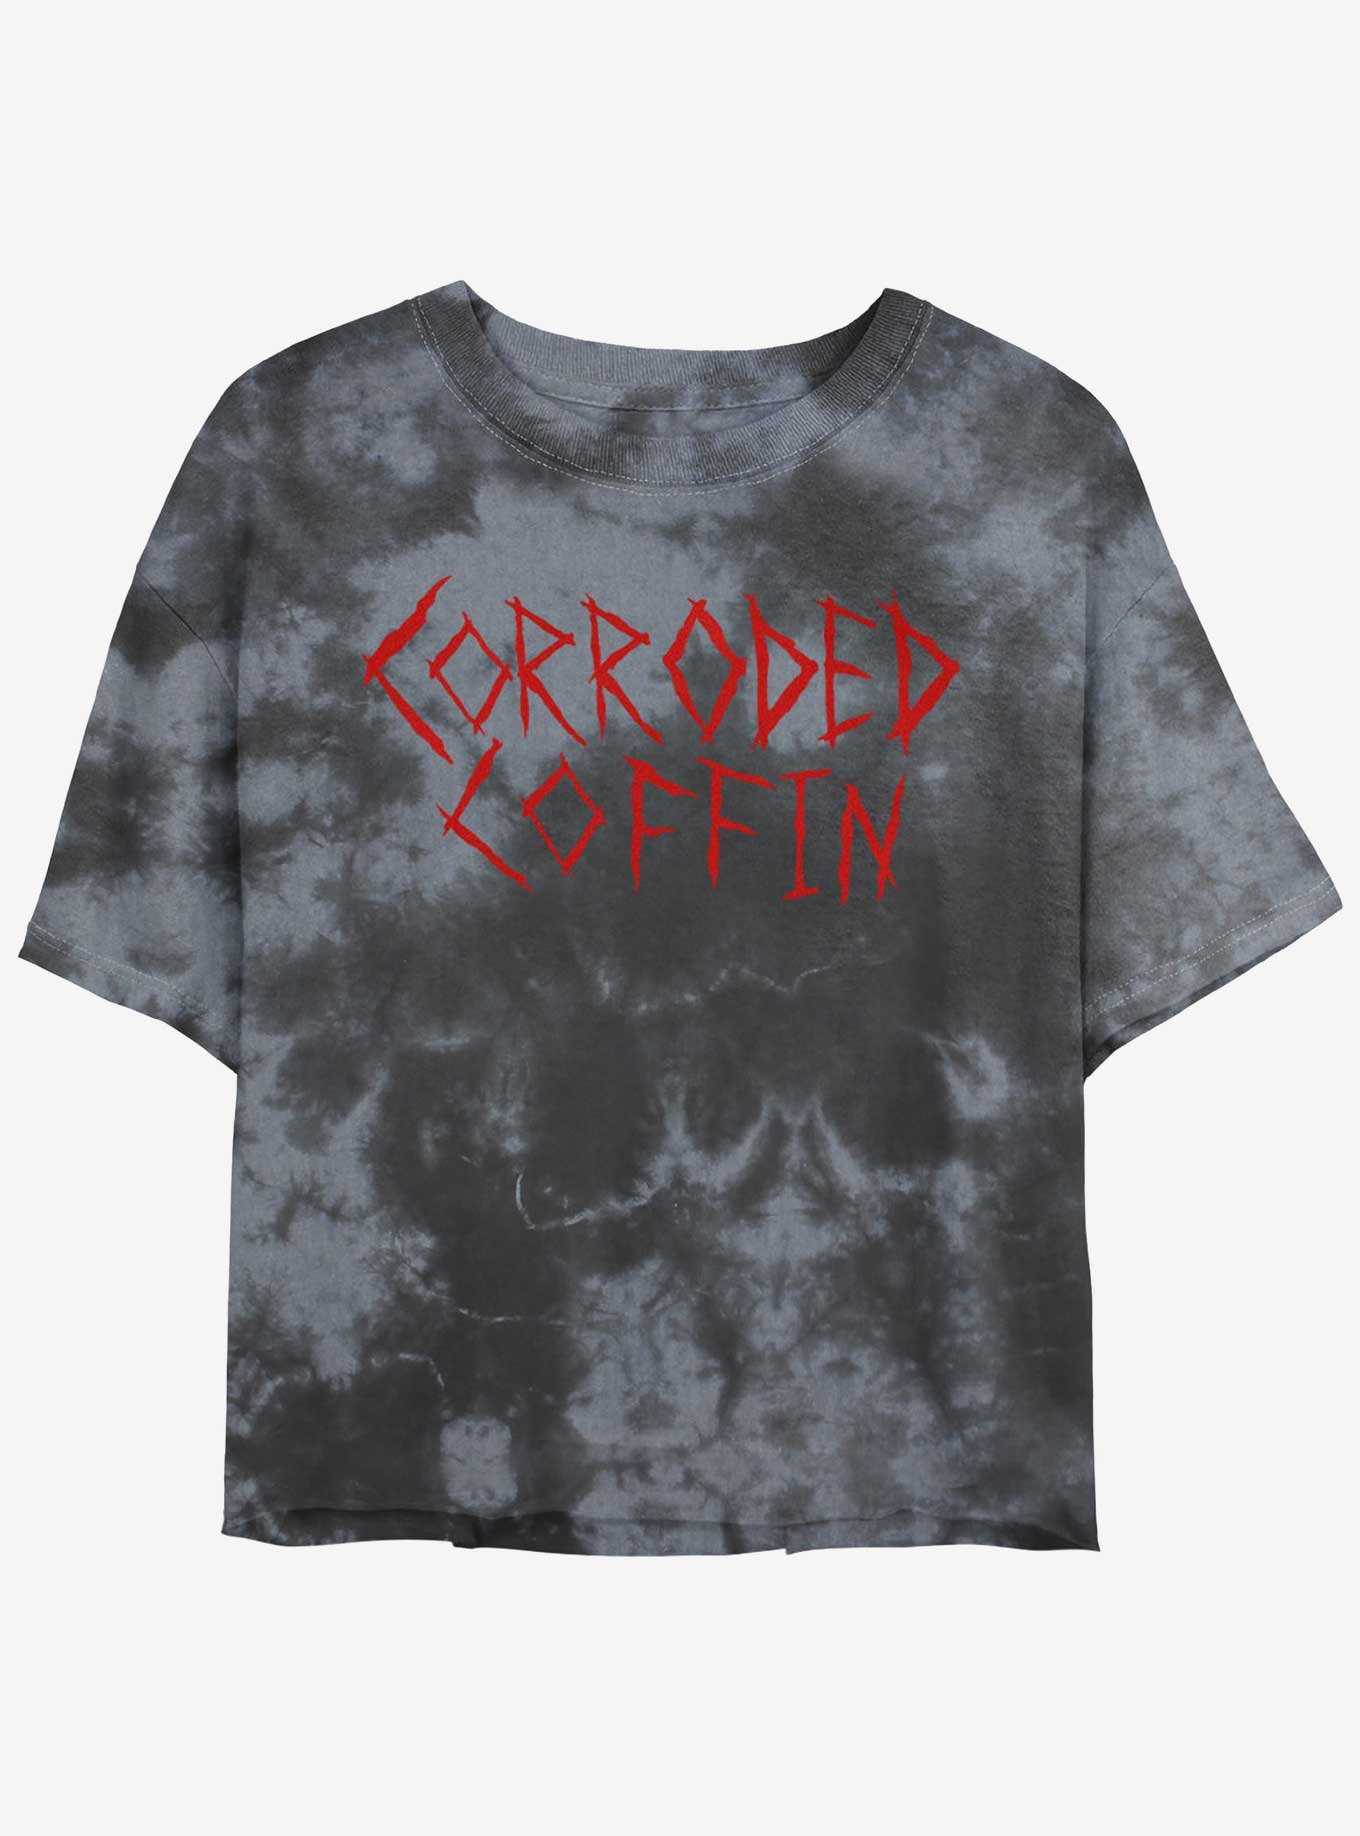 Stranger Things Corroded Coffin Mineral Wash Crop Girls T-Shirt, , hi-res